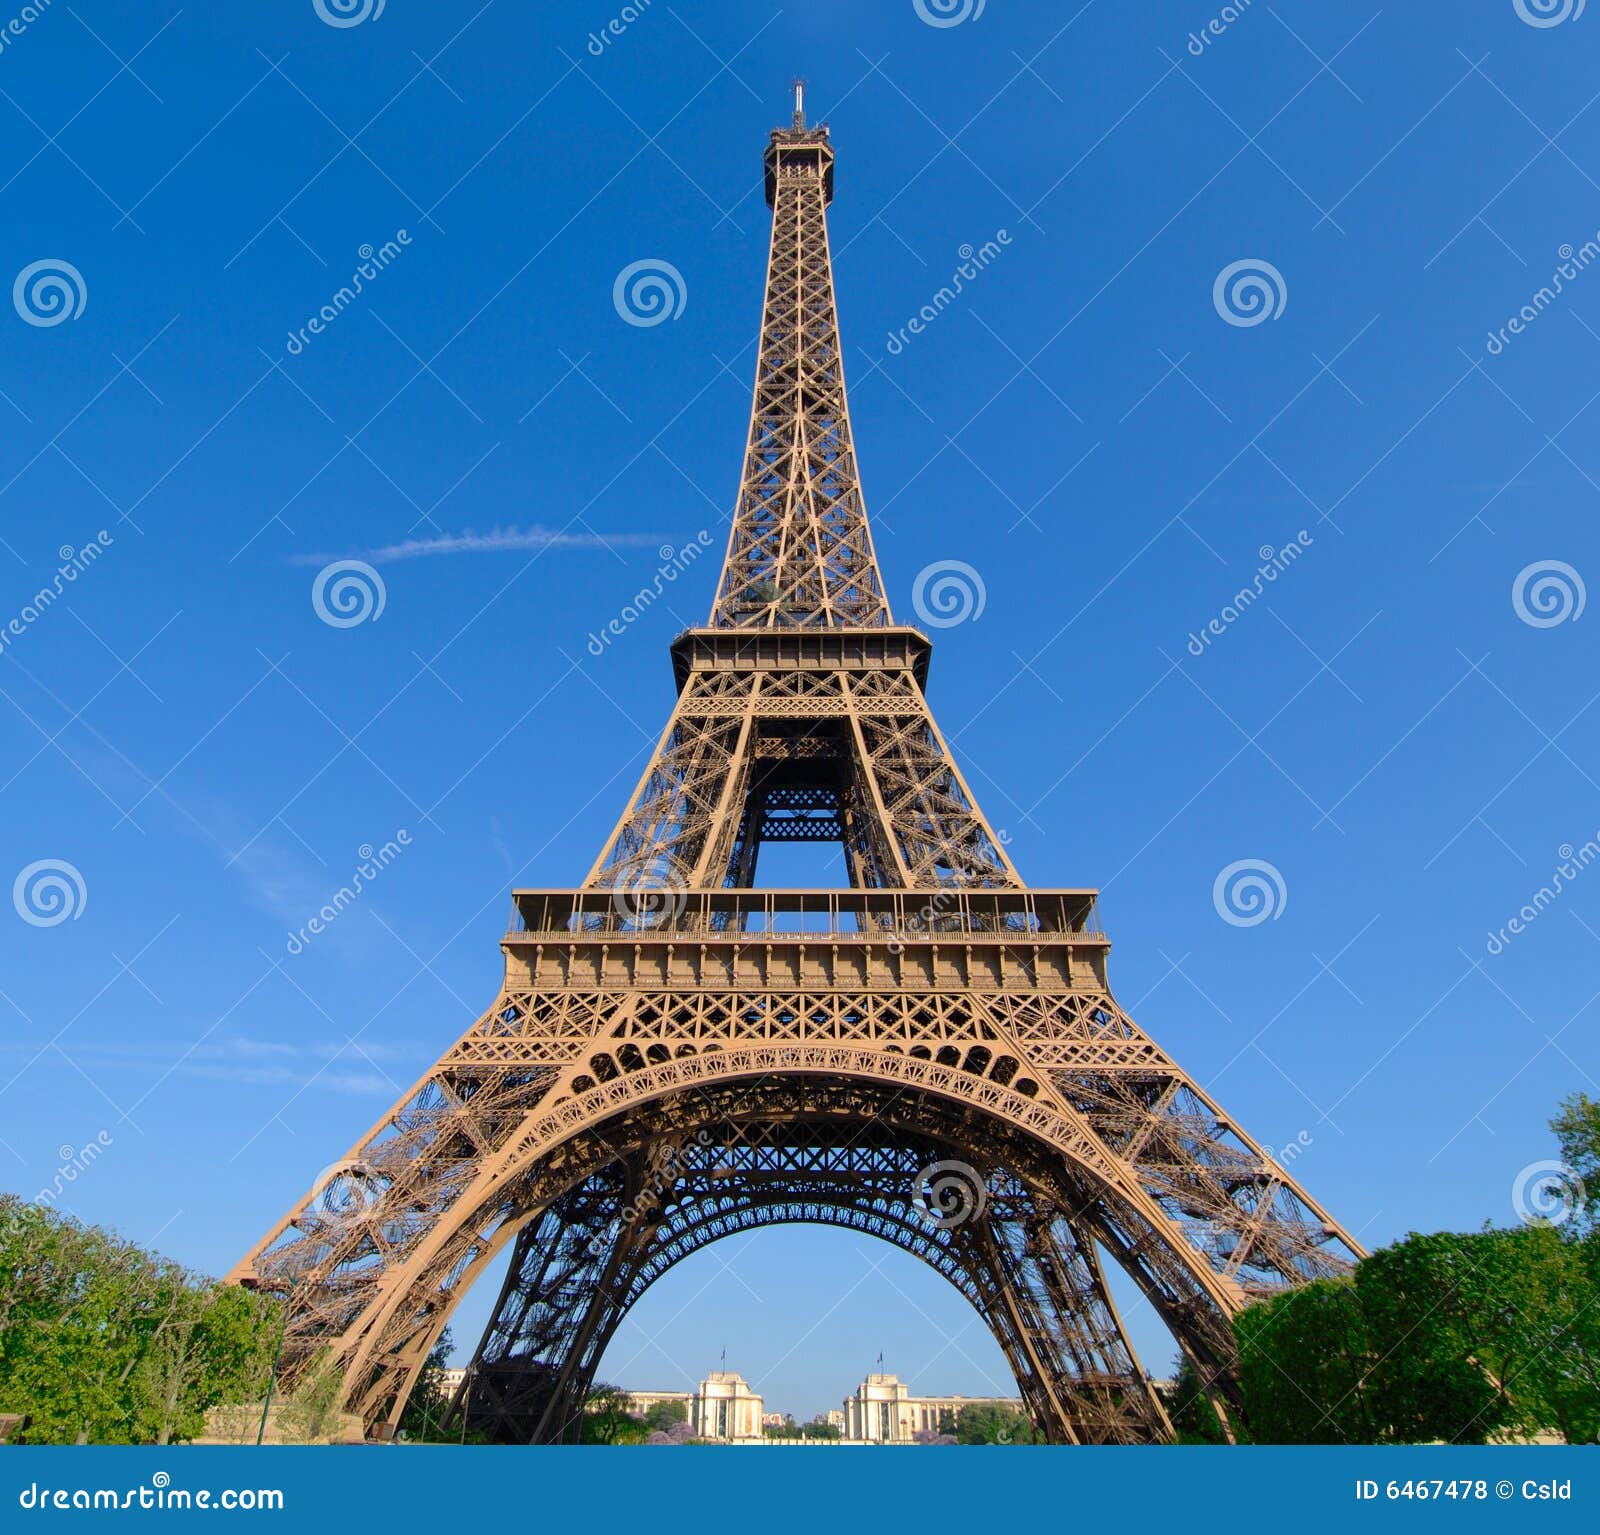 Wide Angle On The Eiffel Tower Stock Photo - Image: 6467478